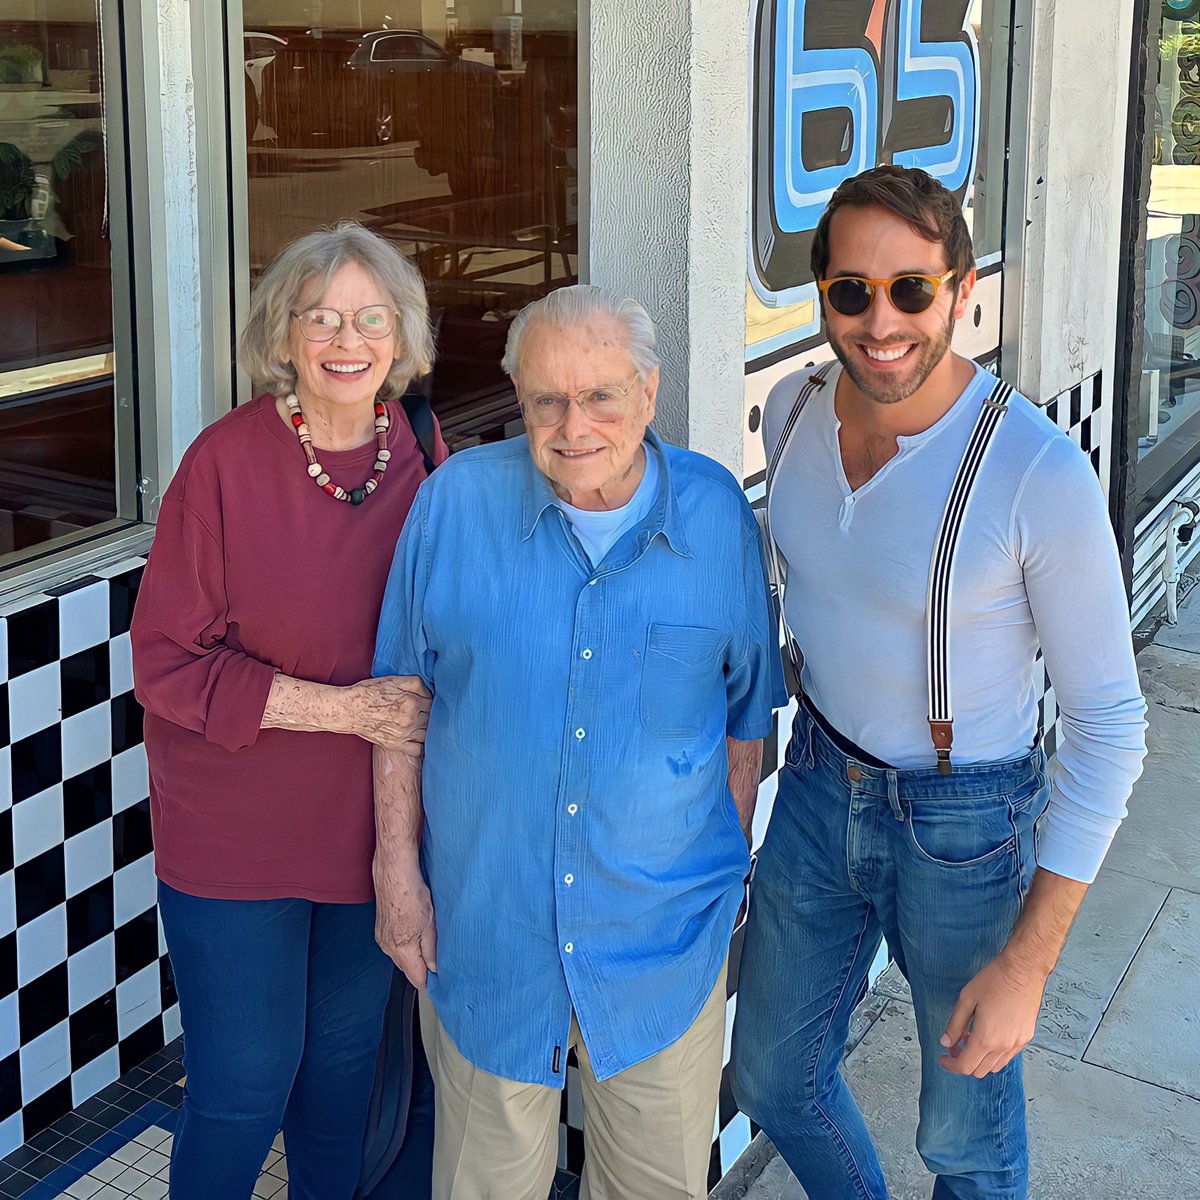 There’s not much that I cherish more than my breakfast hangouts with my dear friends, “Mr. Feeny” actor @MrBillDaniels and his equally talented wife & actor Bonnie Bartlett Daniels. At 96 and 94 years young, Bill & Bonnie continue to bring so much joy to my (boy meets) world. 💙